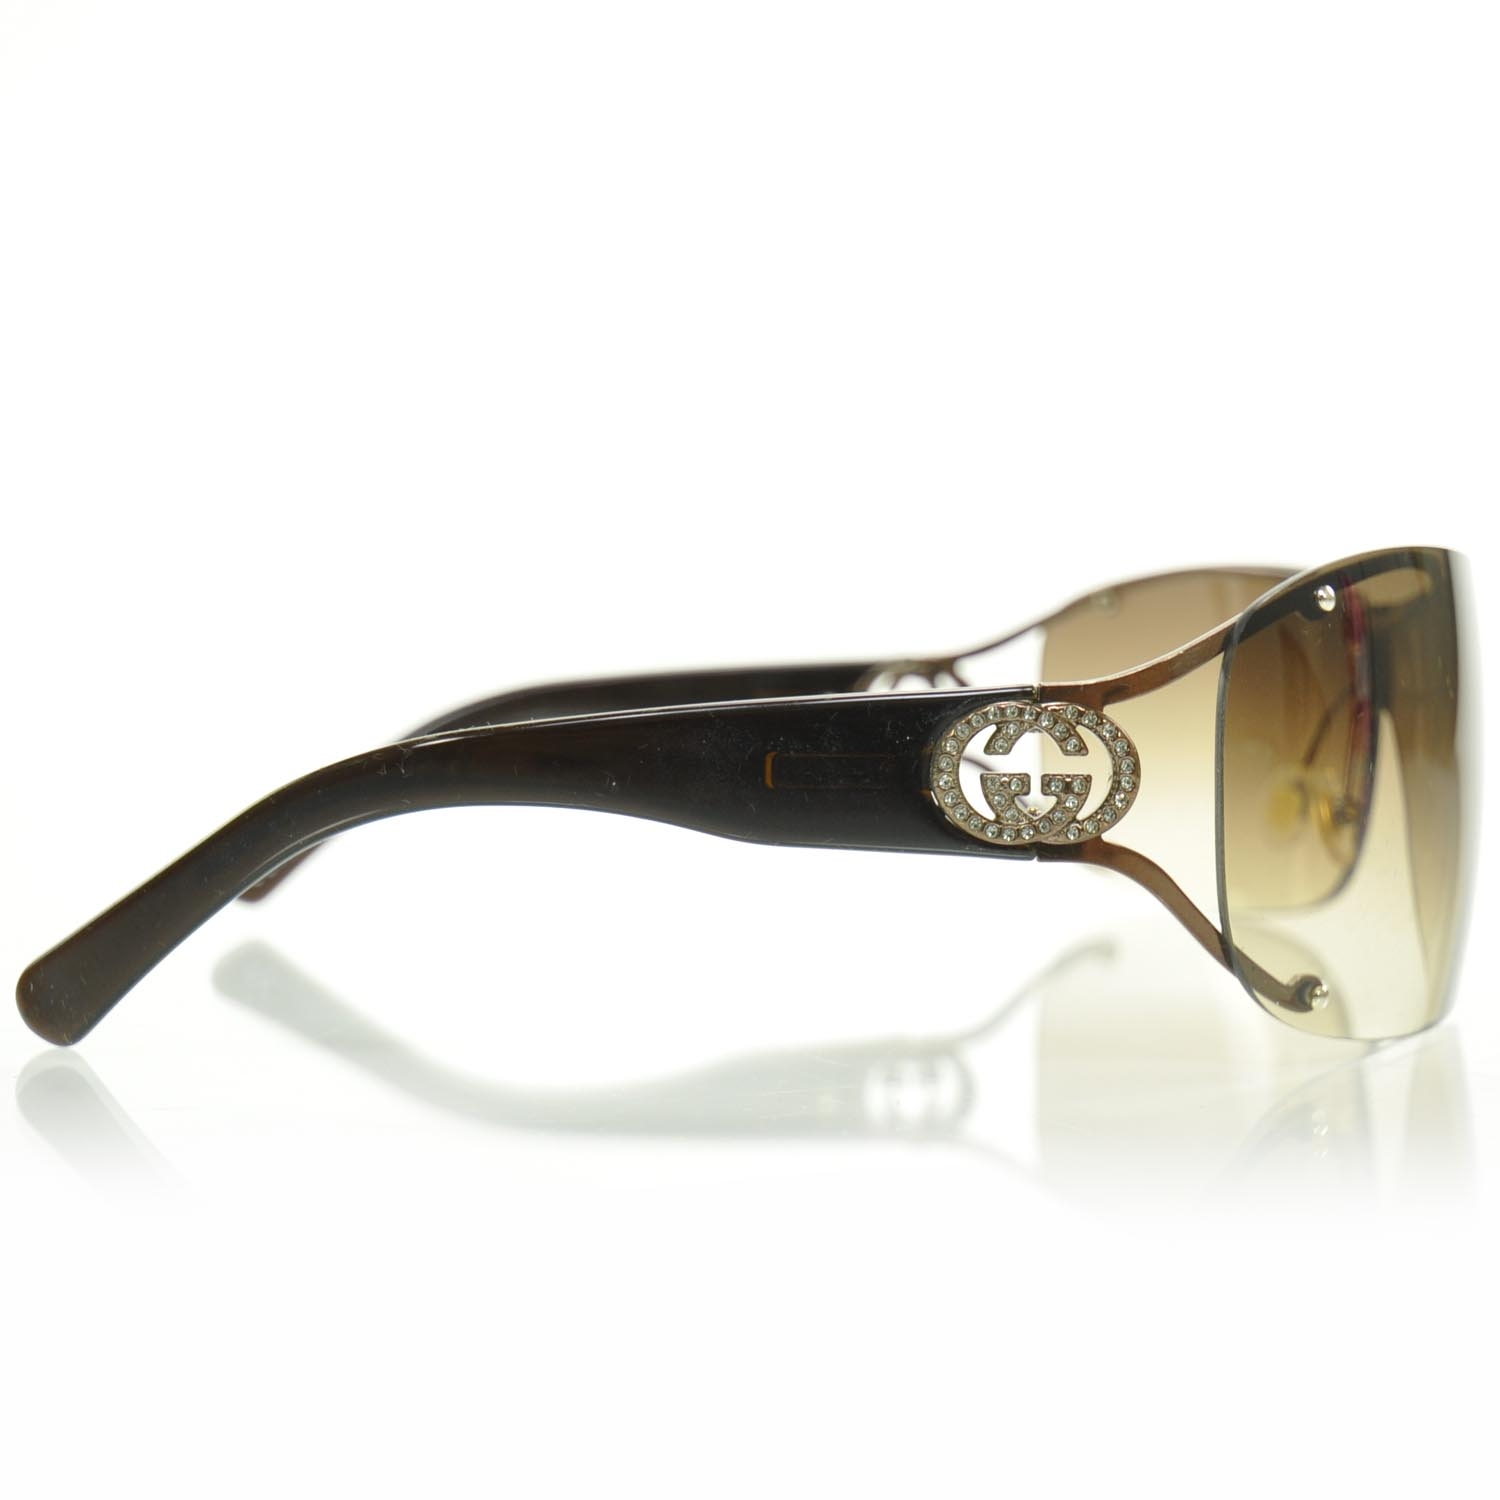 Gucci Crystal Gg Sunglasses 2807s Brown 25316